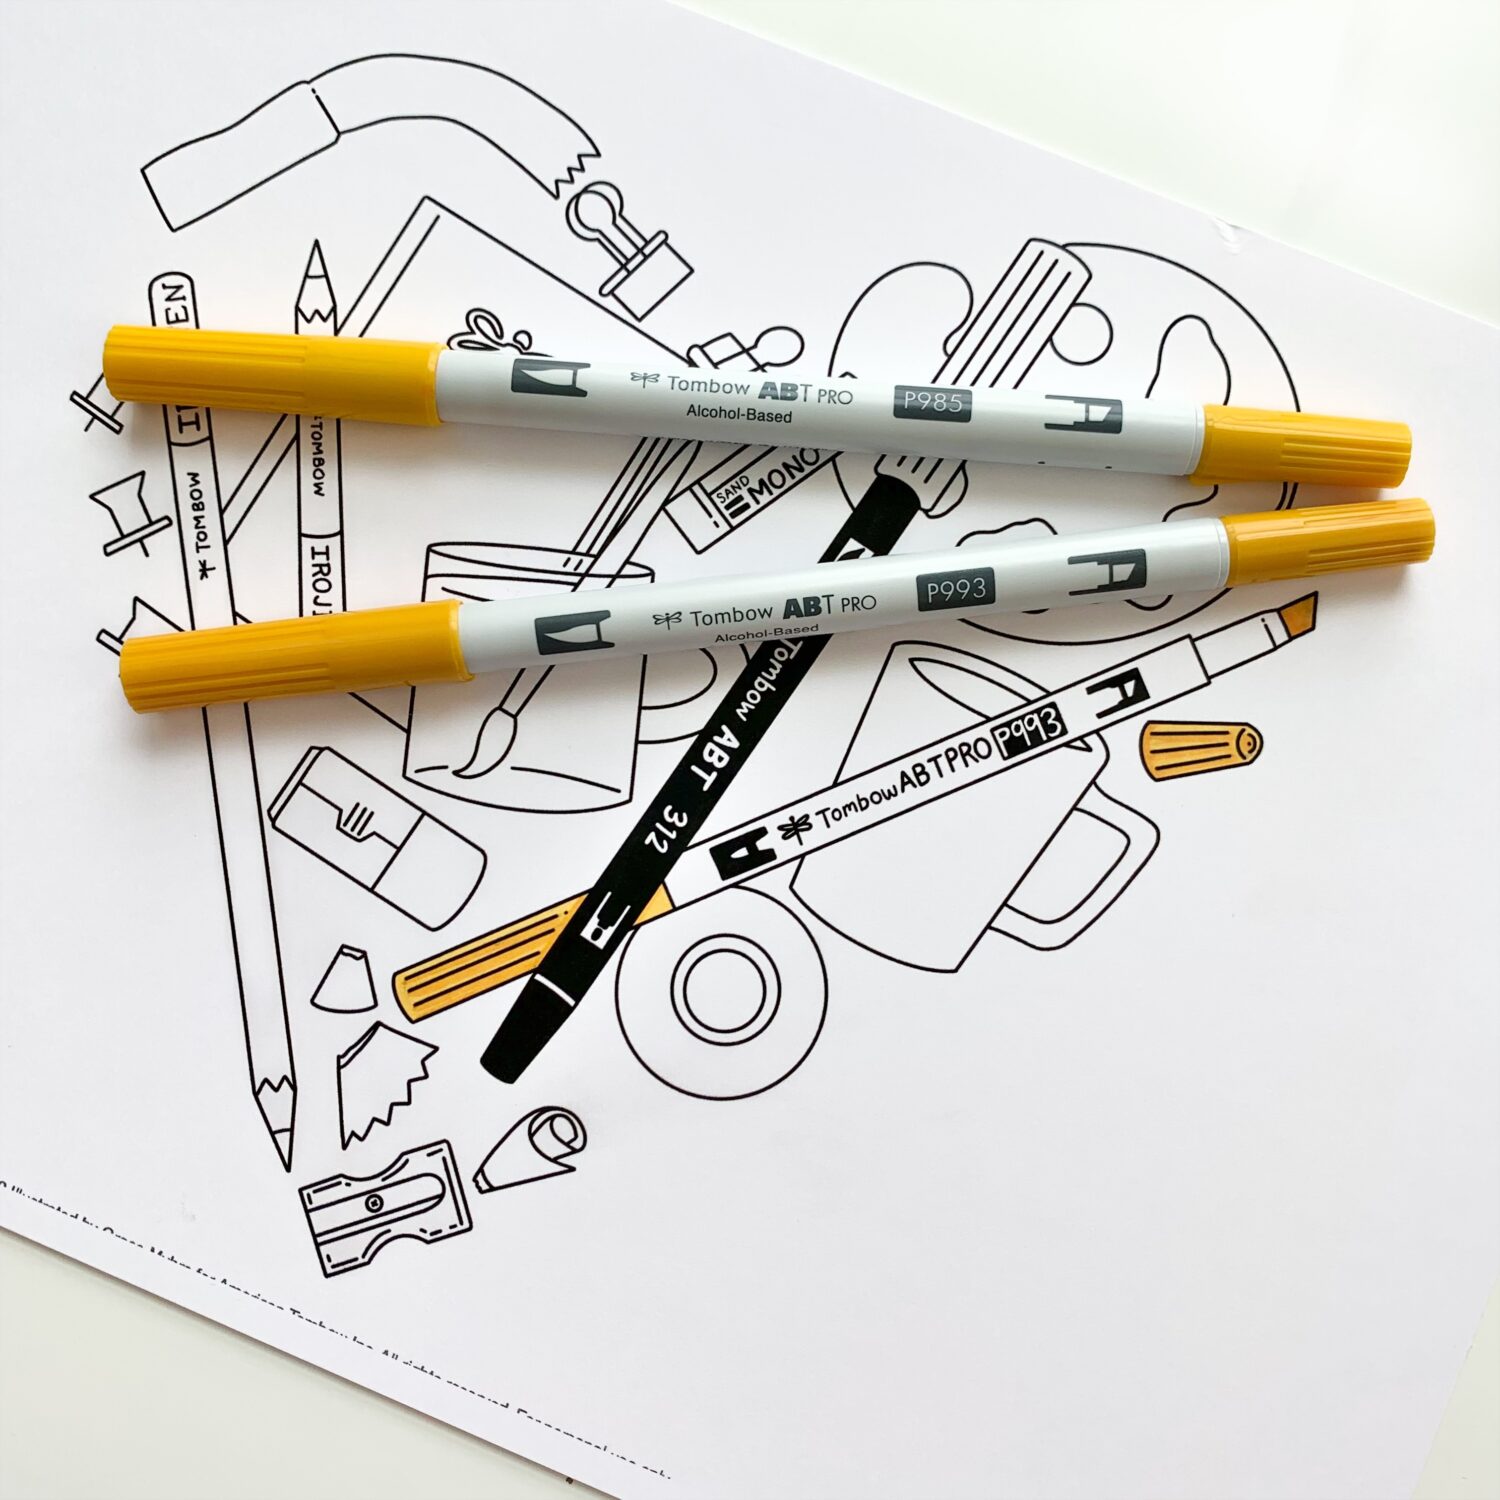 http://blog.tombowusa.com/wp-content/uploads/files/Free-Tombow-Coloring-Worksheets-for-Relaxation-with-the-Tombow-ABT-PRO-by-Jennie-Garcia-002-1500x1500.jpeg